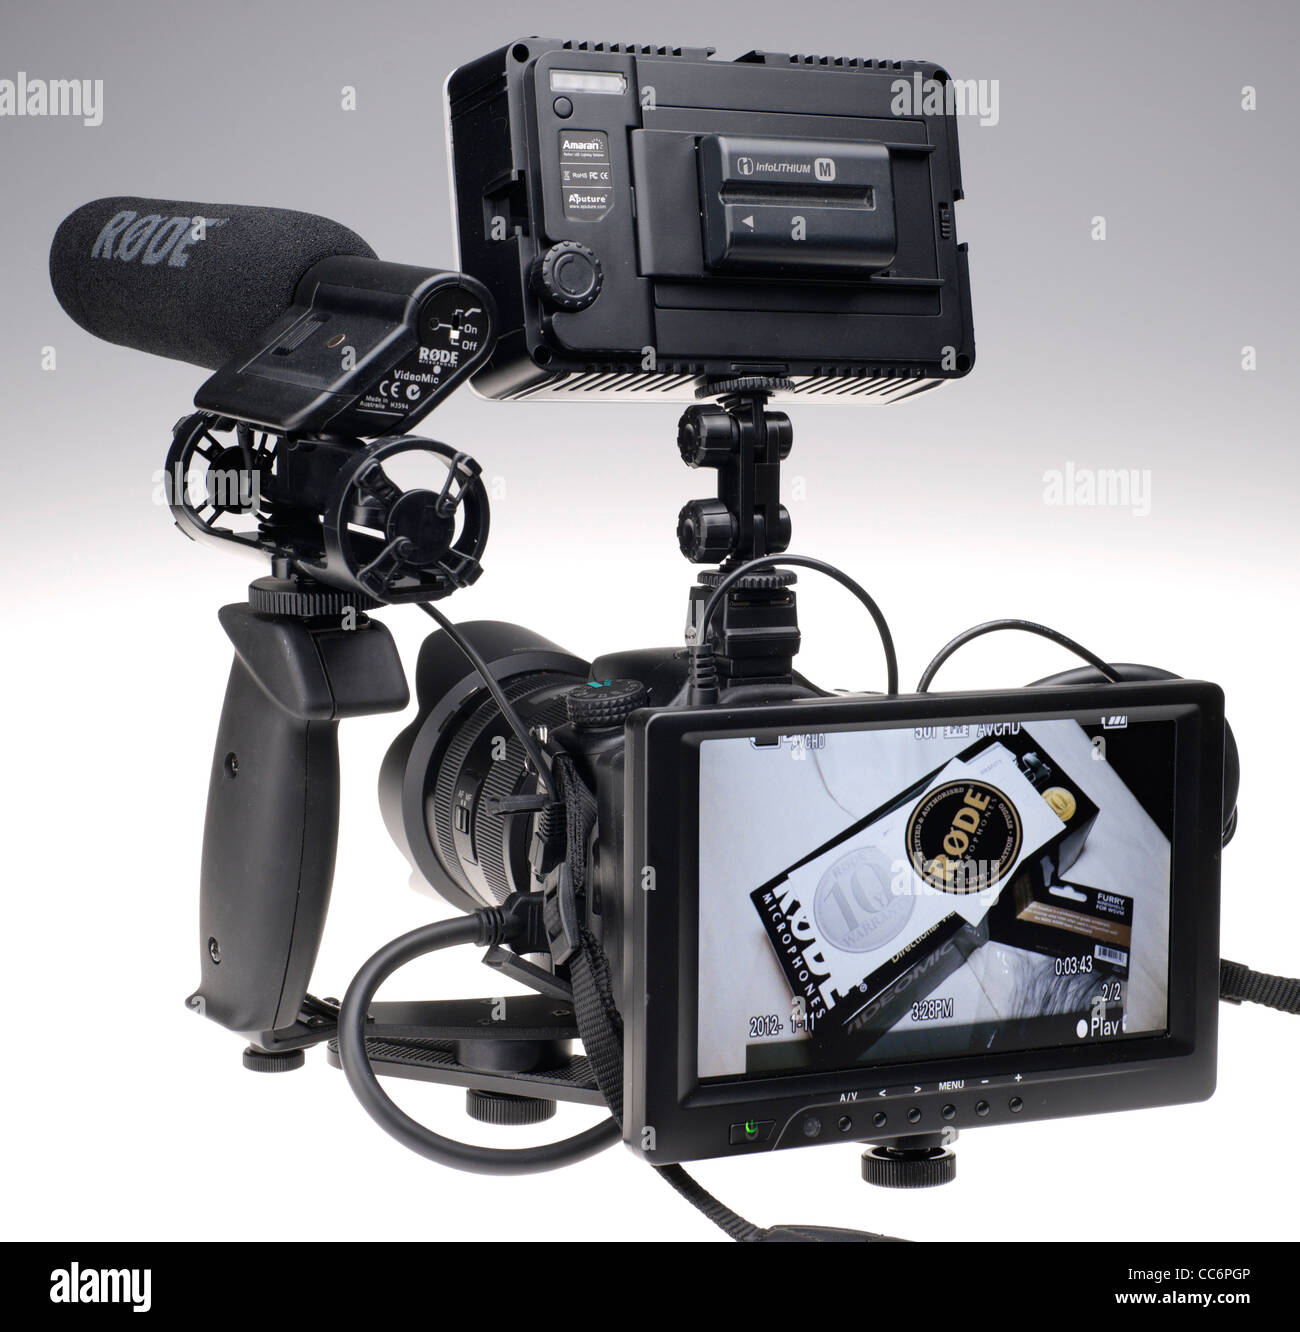 Sony Alpha 77 HD video rig with LED camera top light, Røde VideoMic microphone, and 7 inch large HD monitor for framing shots. Stock Photo